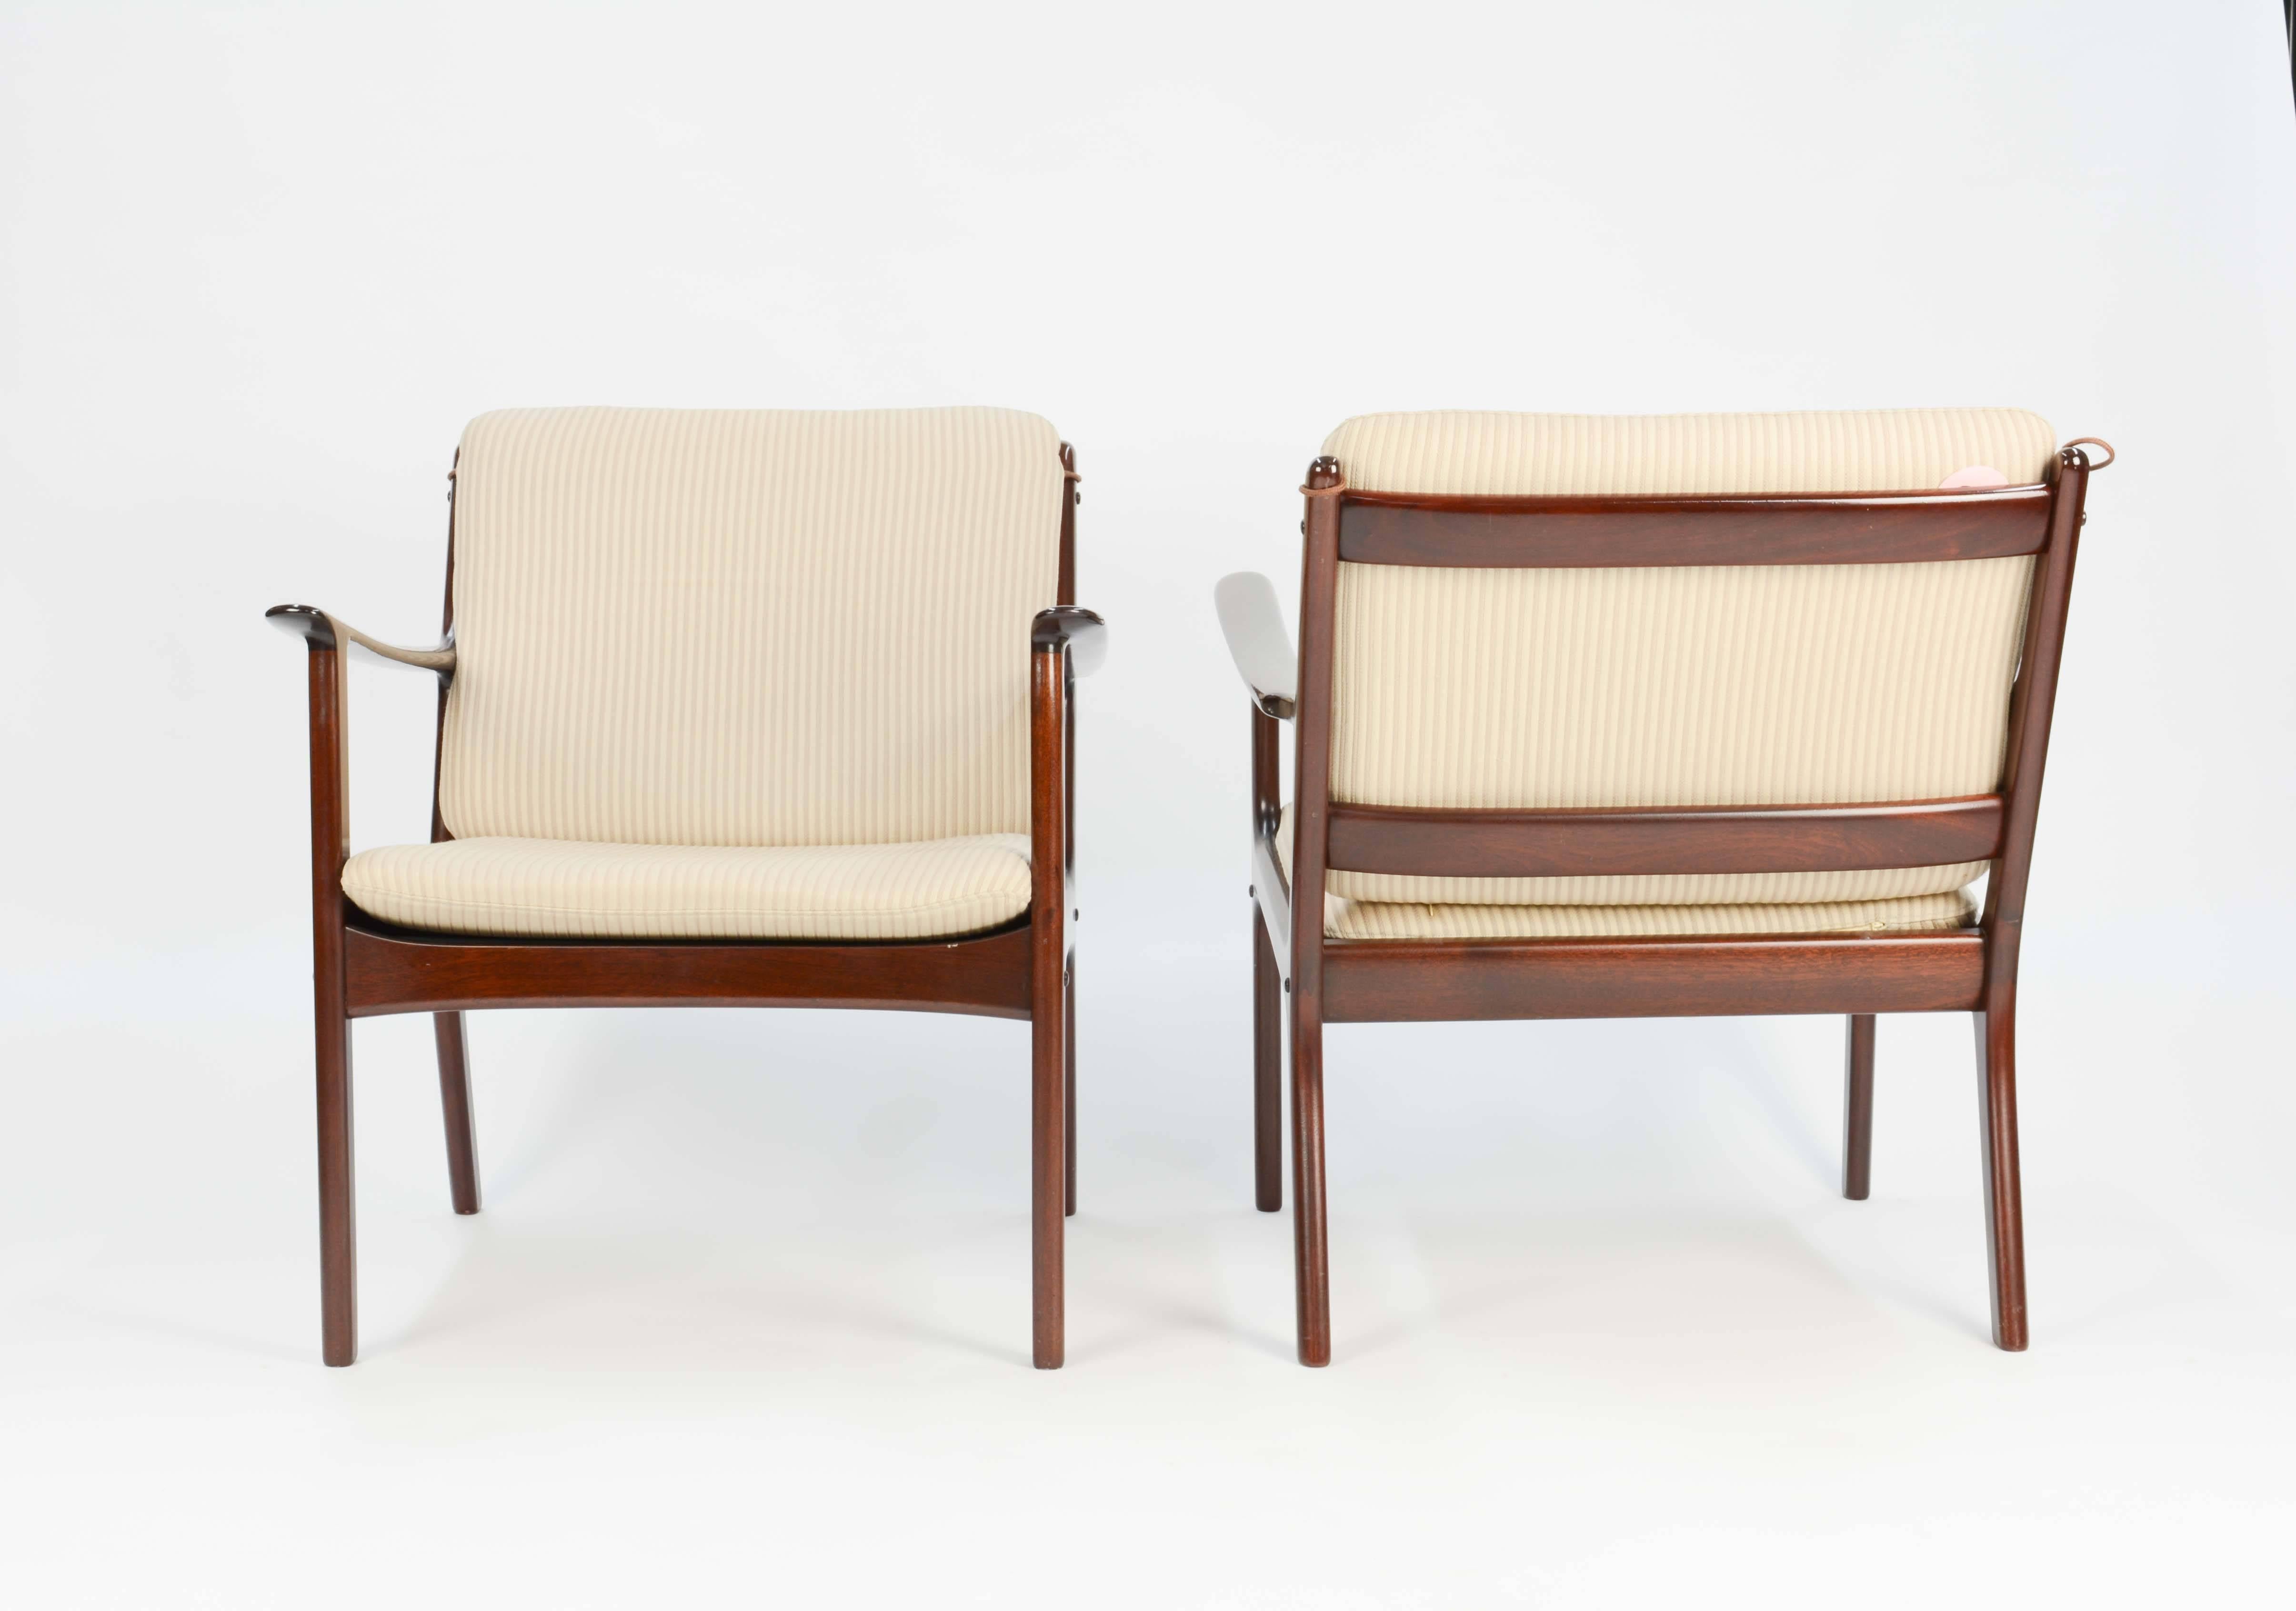 A pair of Ole Wanscher's club chair JP112 for P. Jeppesens Møbelfabrik of Denmark in mahogany with pin stripped fabric.

The 1950s are the start of the Danish Modern movement and features Wanscher's signature arms and JP Mobelfabtik's beautiful